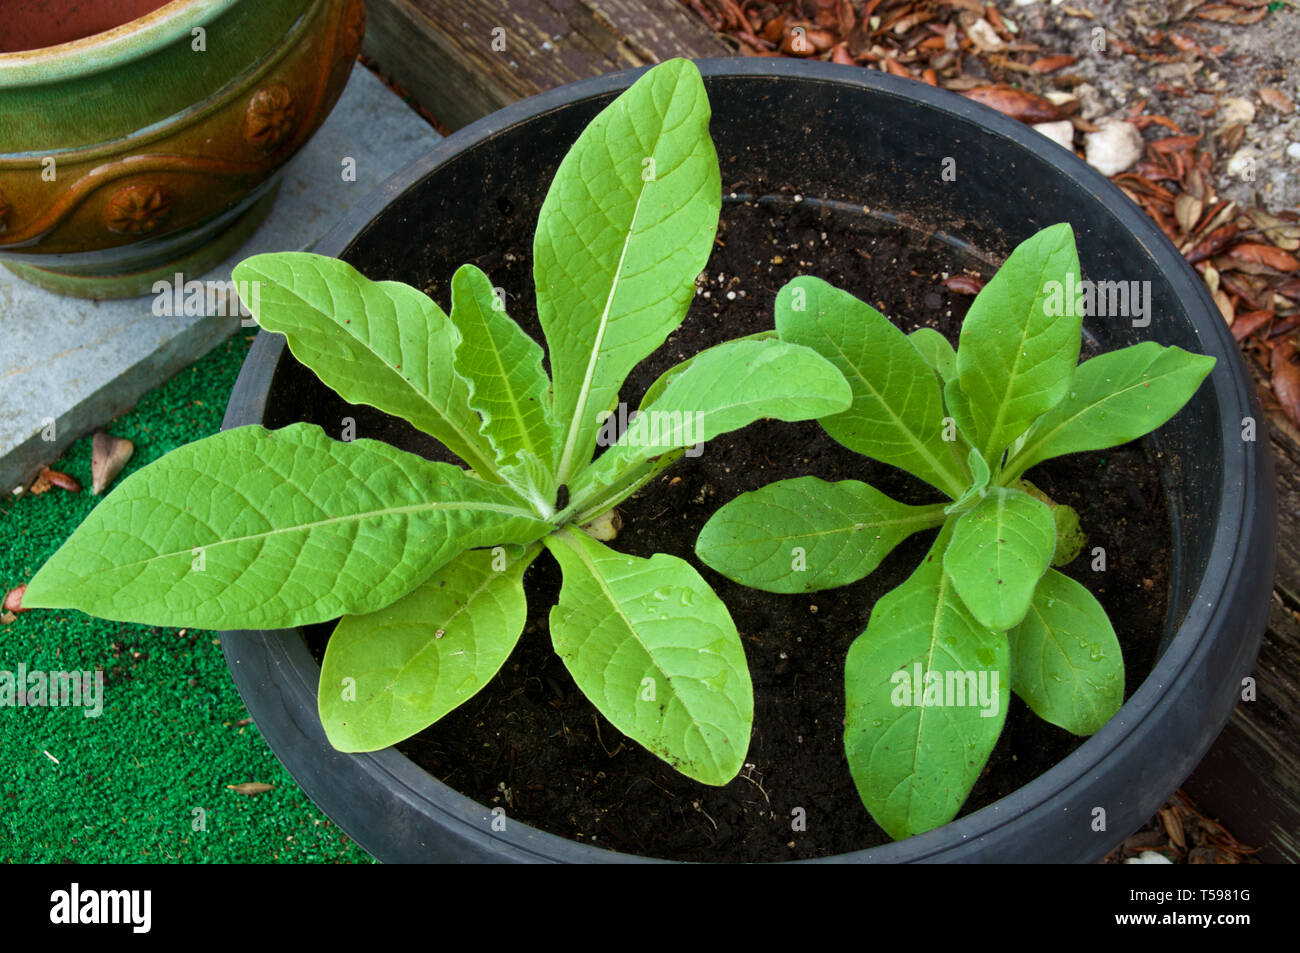 looking down at young nicotiana alata plants growing in pot in backyard garden, also known at night blooming jasmine tobacco. Stock Photo